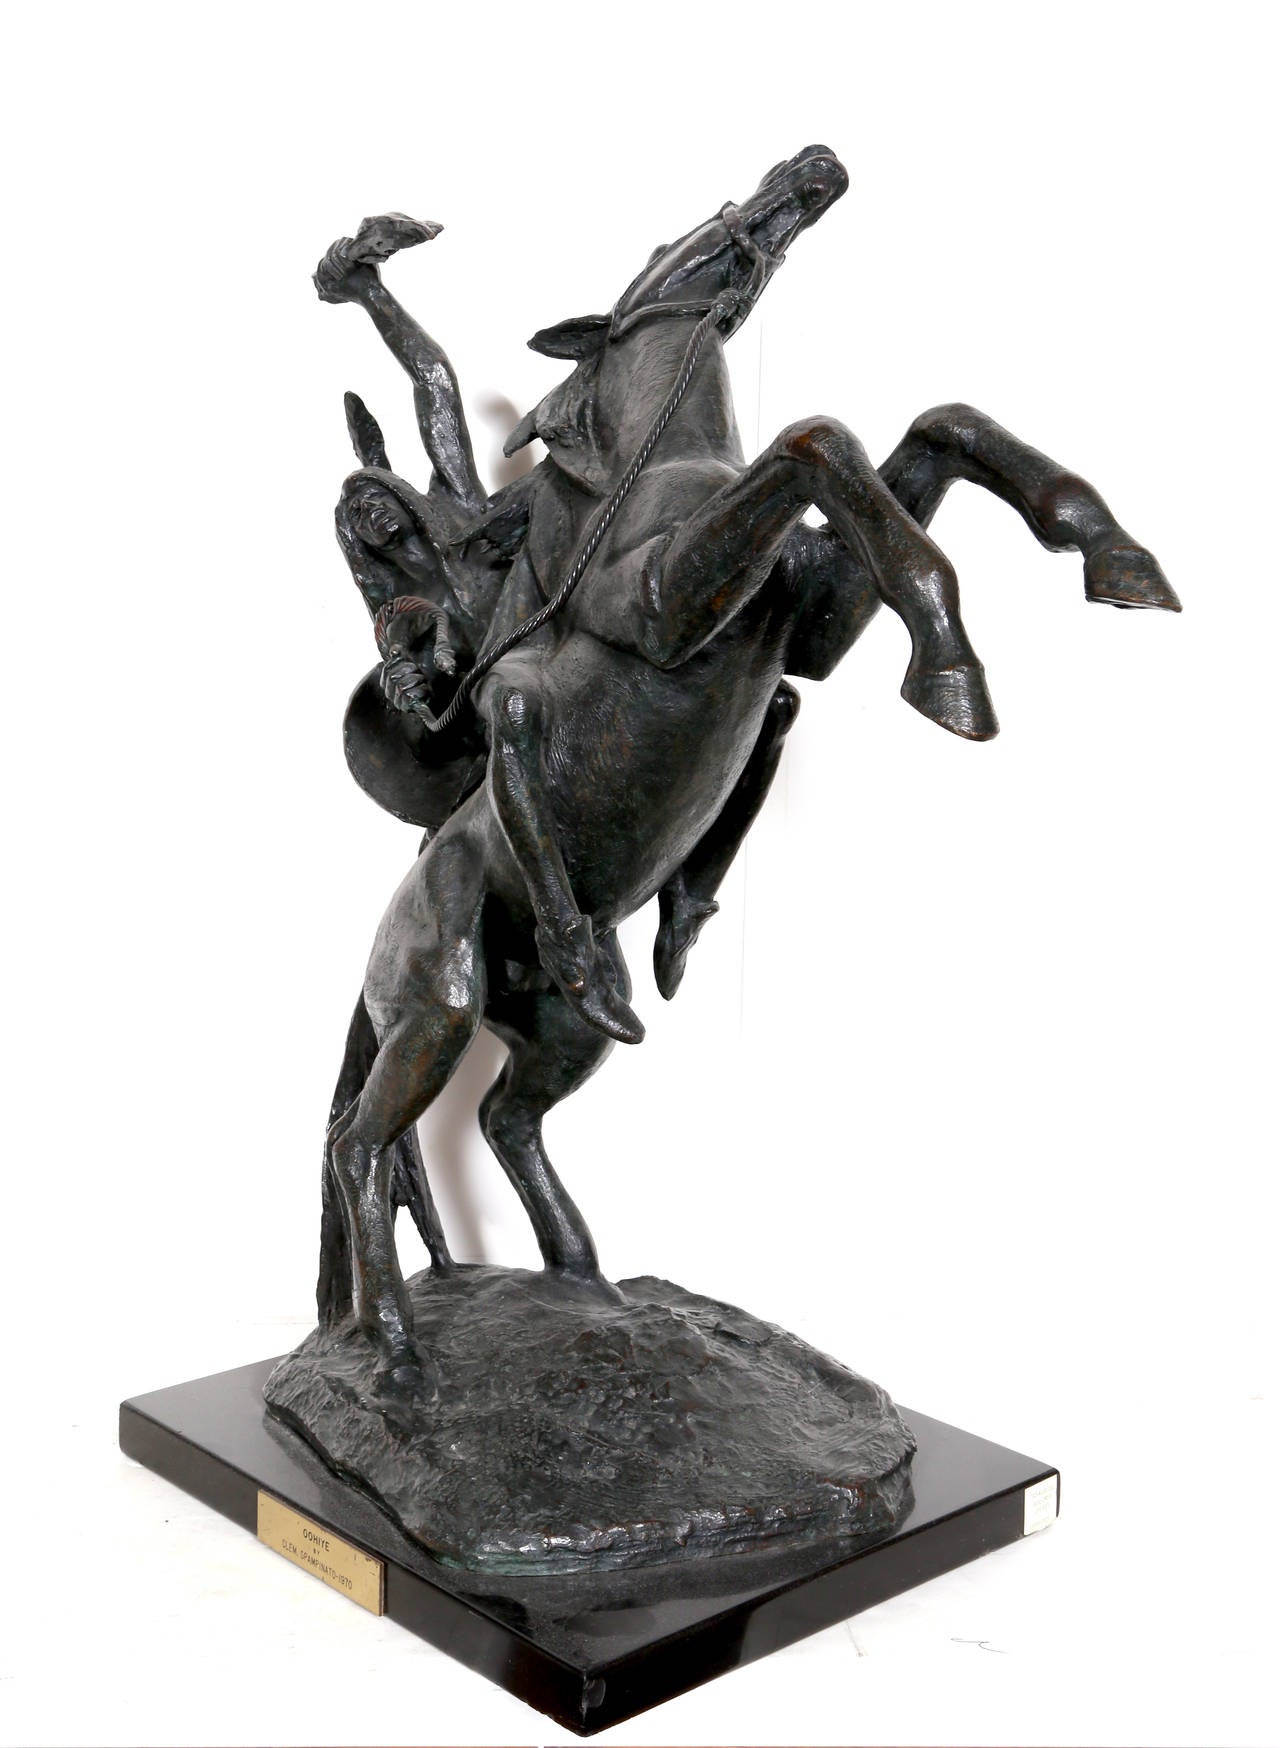 A classic relic from the American West, Spampinato's exquisite solid bronze sculpture is beauty, grace and action-packed. Signature inscribed on sculpture and plate stamped on base. 

Title: Oohiye
Year: 1970
Medium: Bronze
Size: 27.5 x 19 x